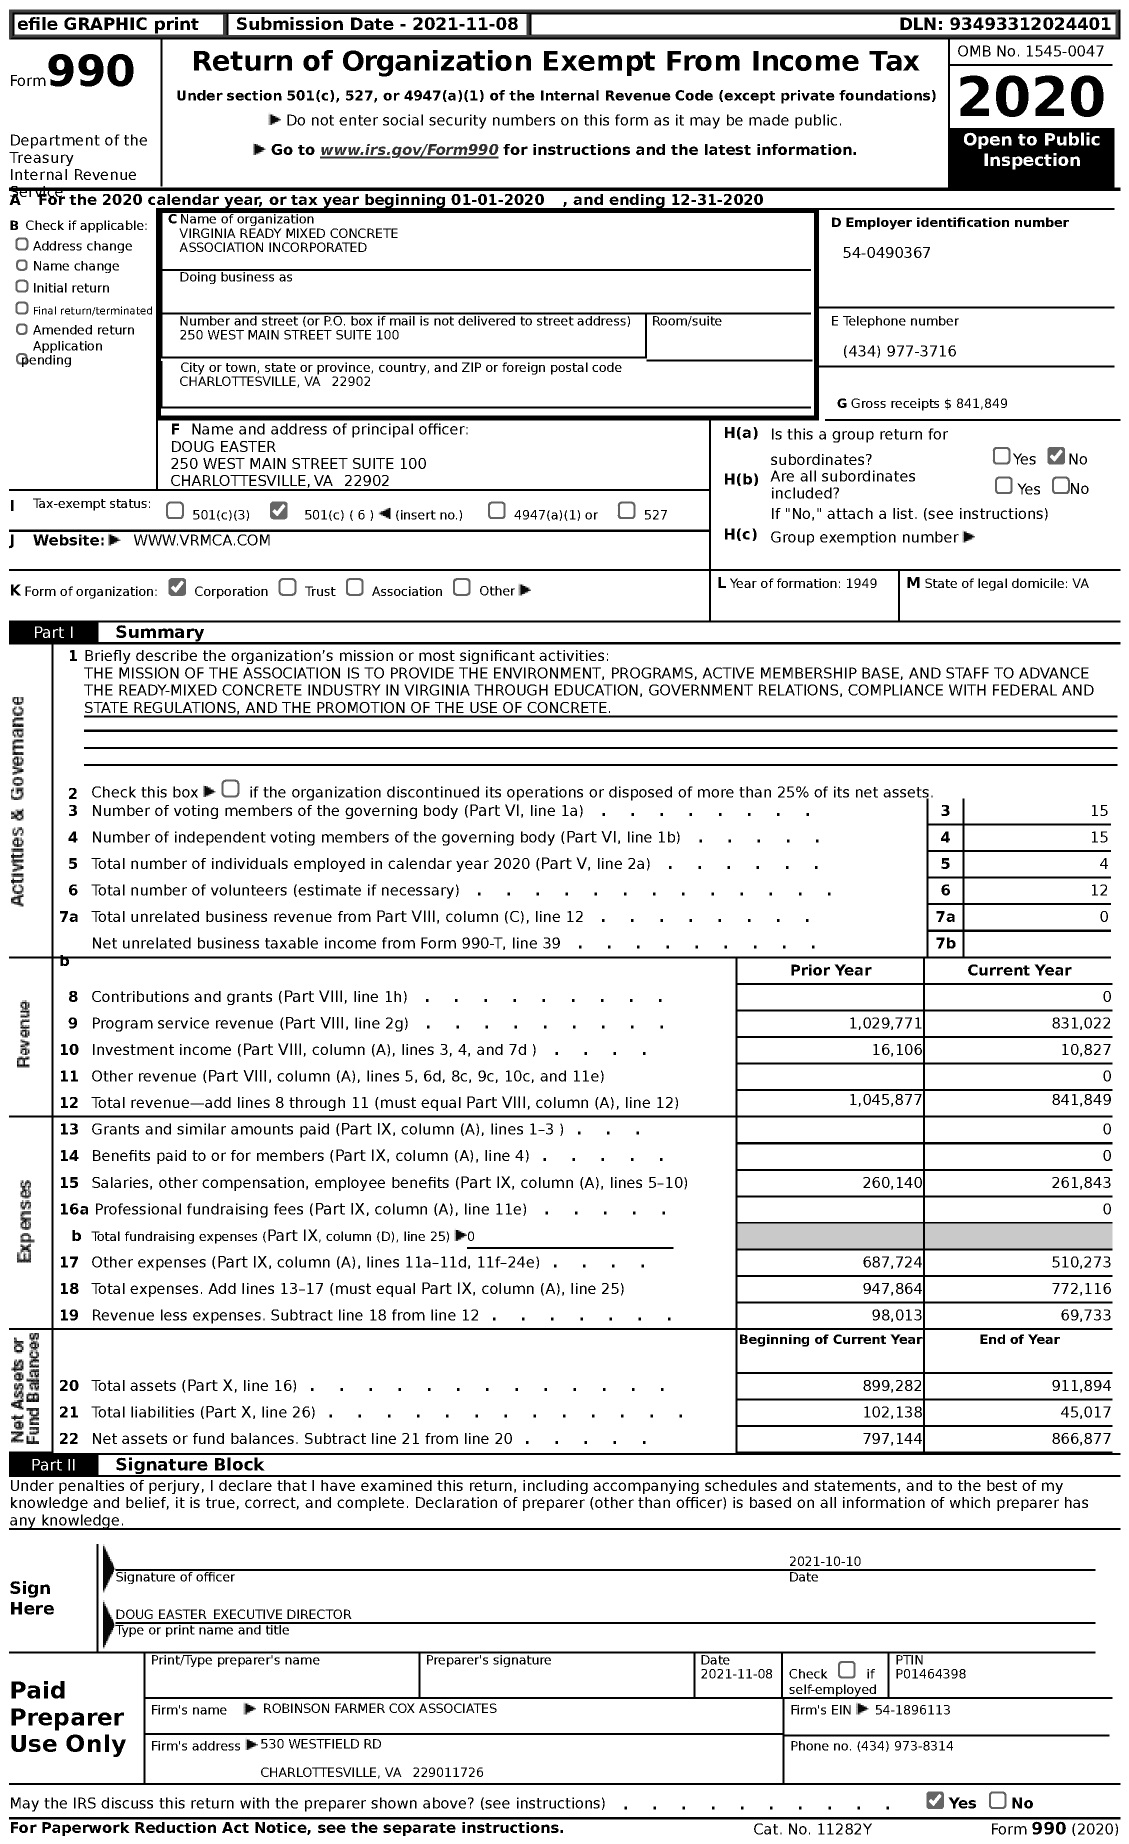 Image of first page of 2020 Form 990 for Virginia Ready Mixed Concrete Association Incorporated